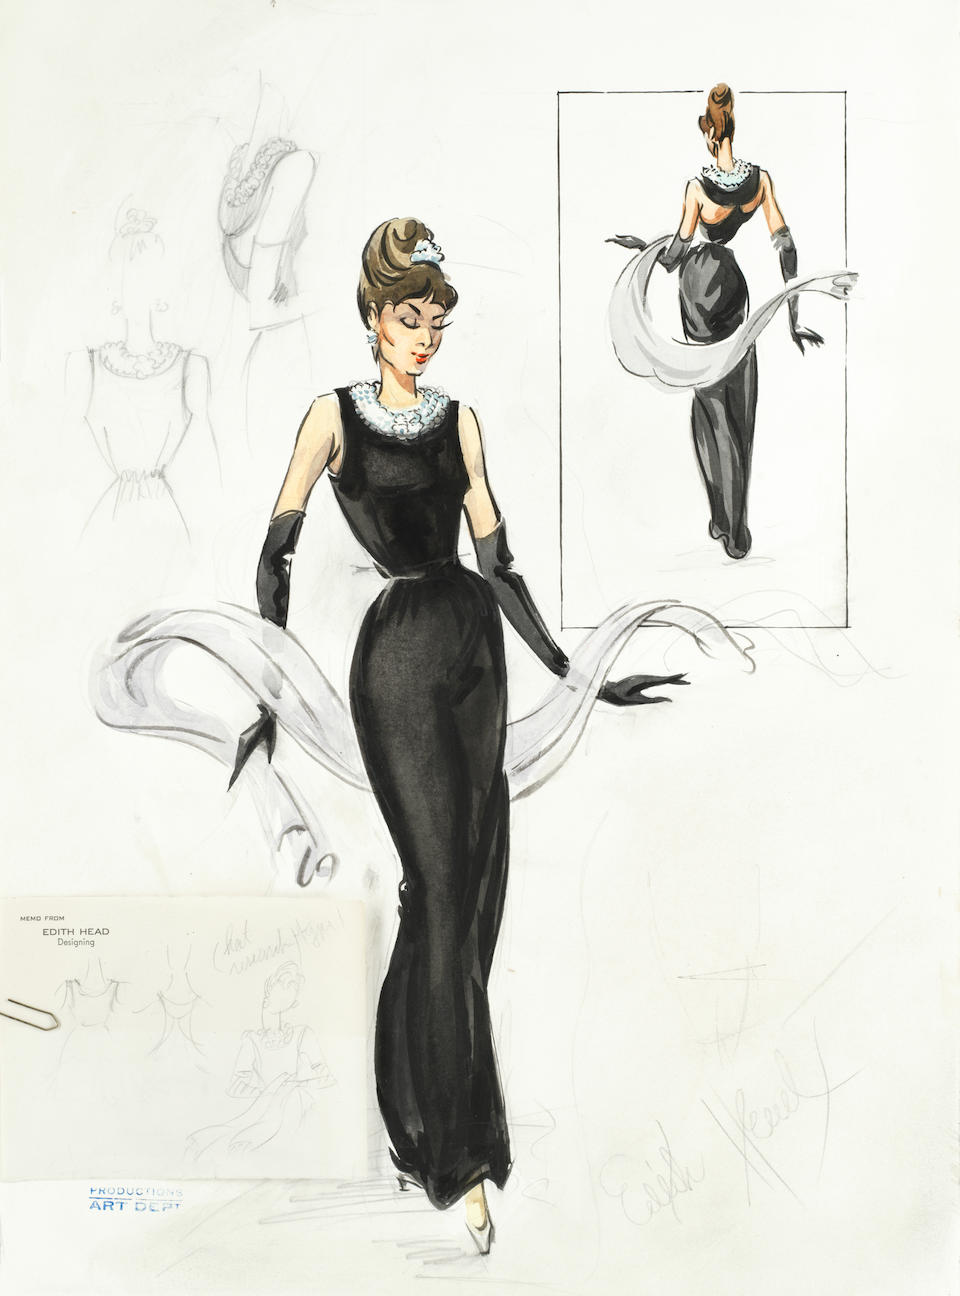 Bonhams Edith Head Audrey Hepburn A Watercolour And Pencil Costume Sketch Of Audrey Hepburn As Holly Golightly For Breakfast At Tiffany S Paramount 1961 A drawing of audrey hepburn, made completely of small dots. bonhams edith head audrey hepburn